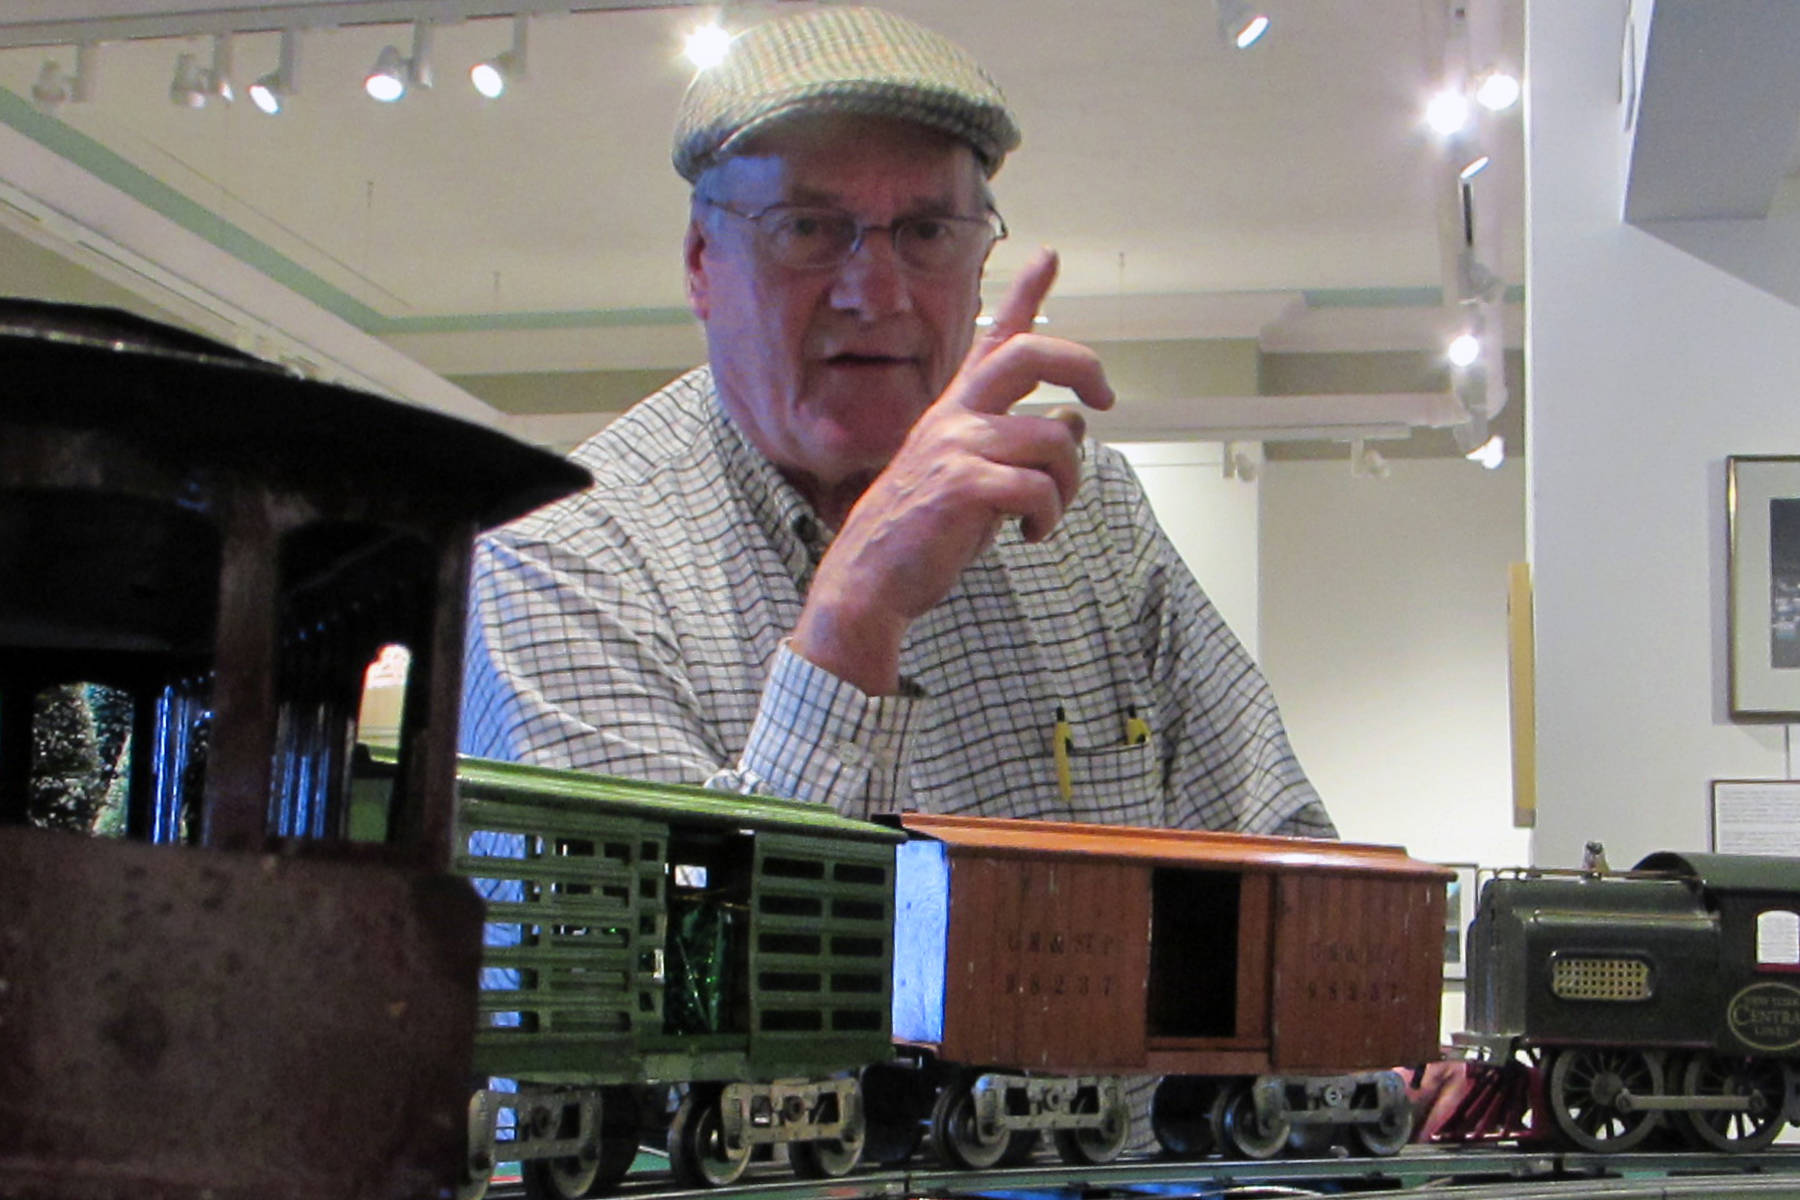 Mike Orford got his first model train at age 4 in 1952, but the trains he brought to Juneau-Douglas City Museum Saturday, Dec. 22, 2018, pre-dated that model. Many of the Lionel trains Orford rain were from 1919 or earlier. (Ben Hohenstatt | Capital City Weekly)